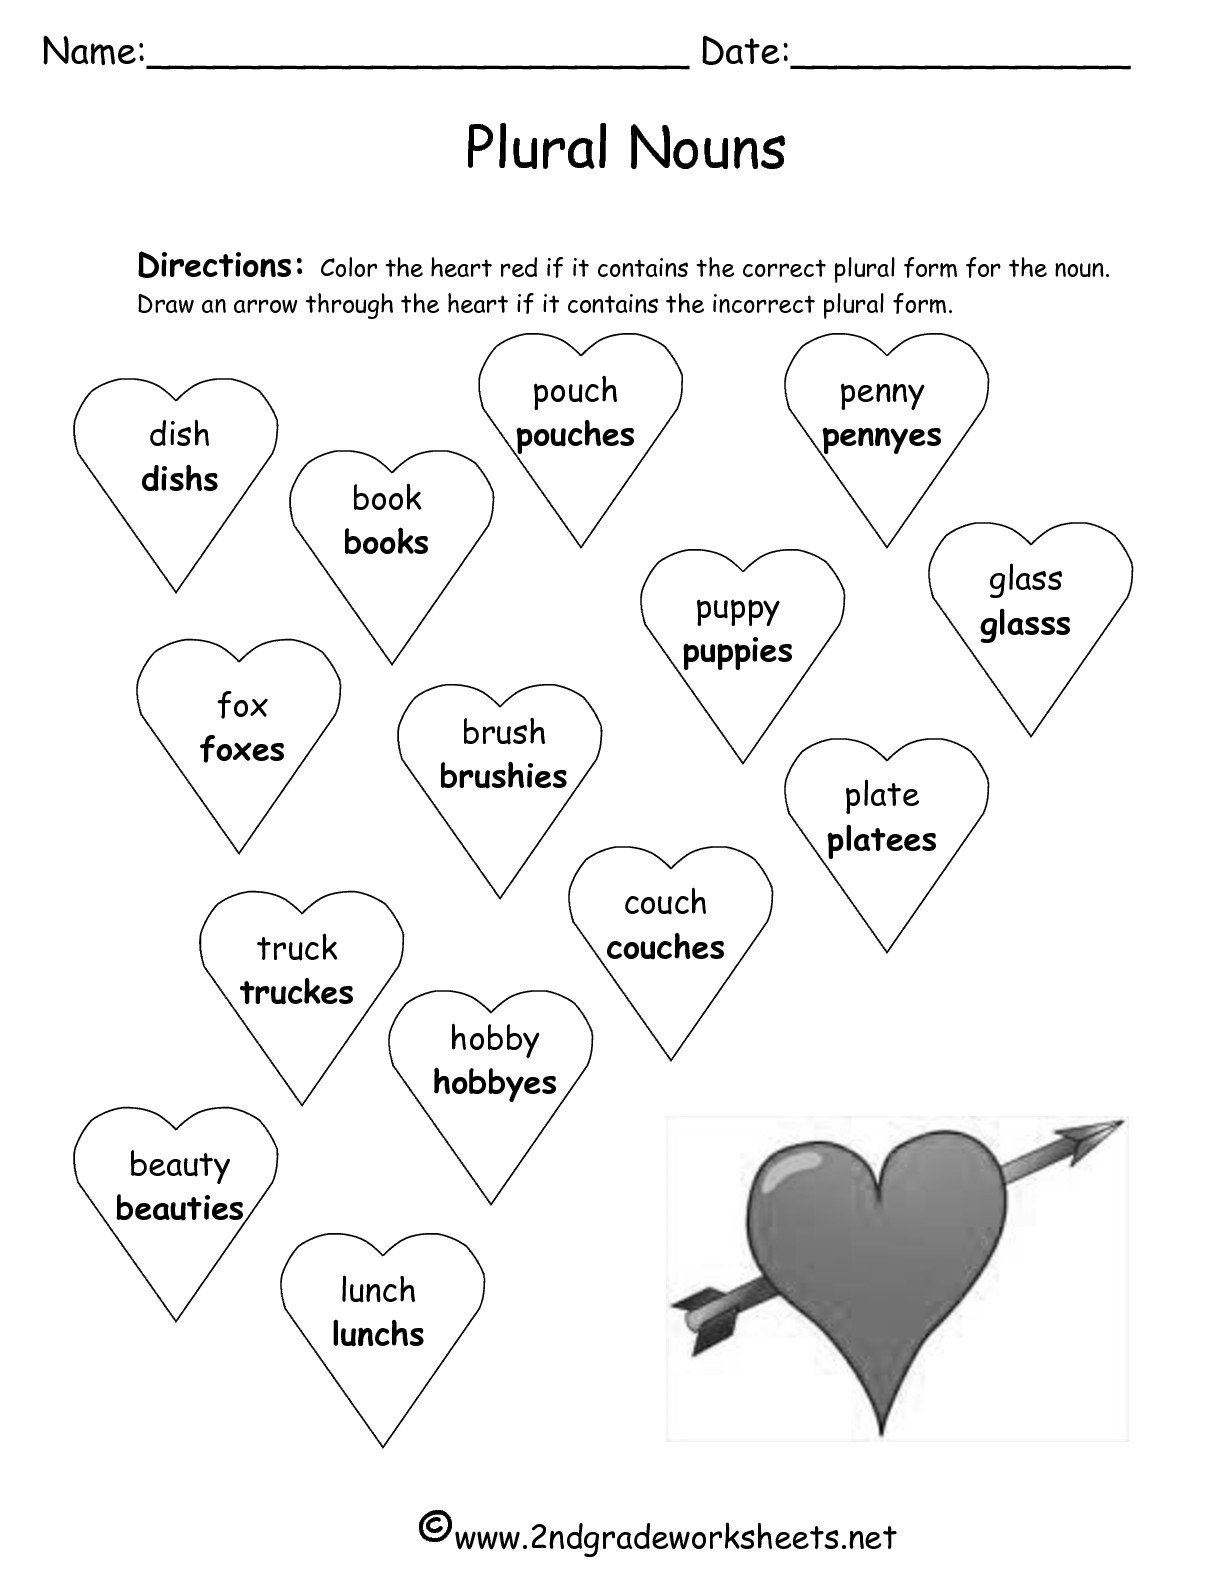 Valentine 39 s Day Printouts And Worksheets